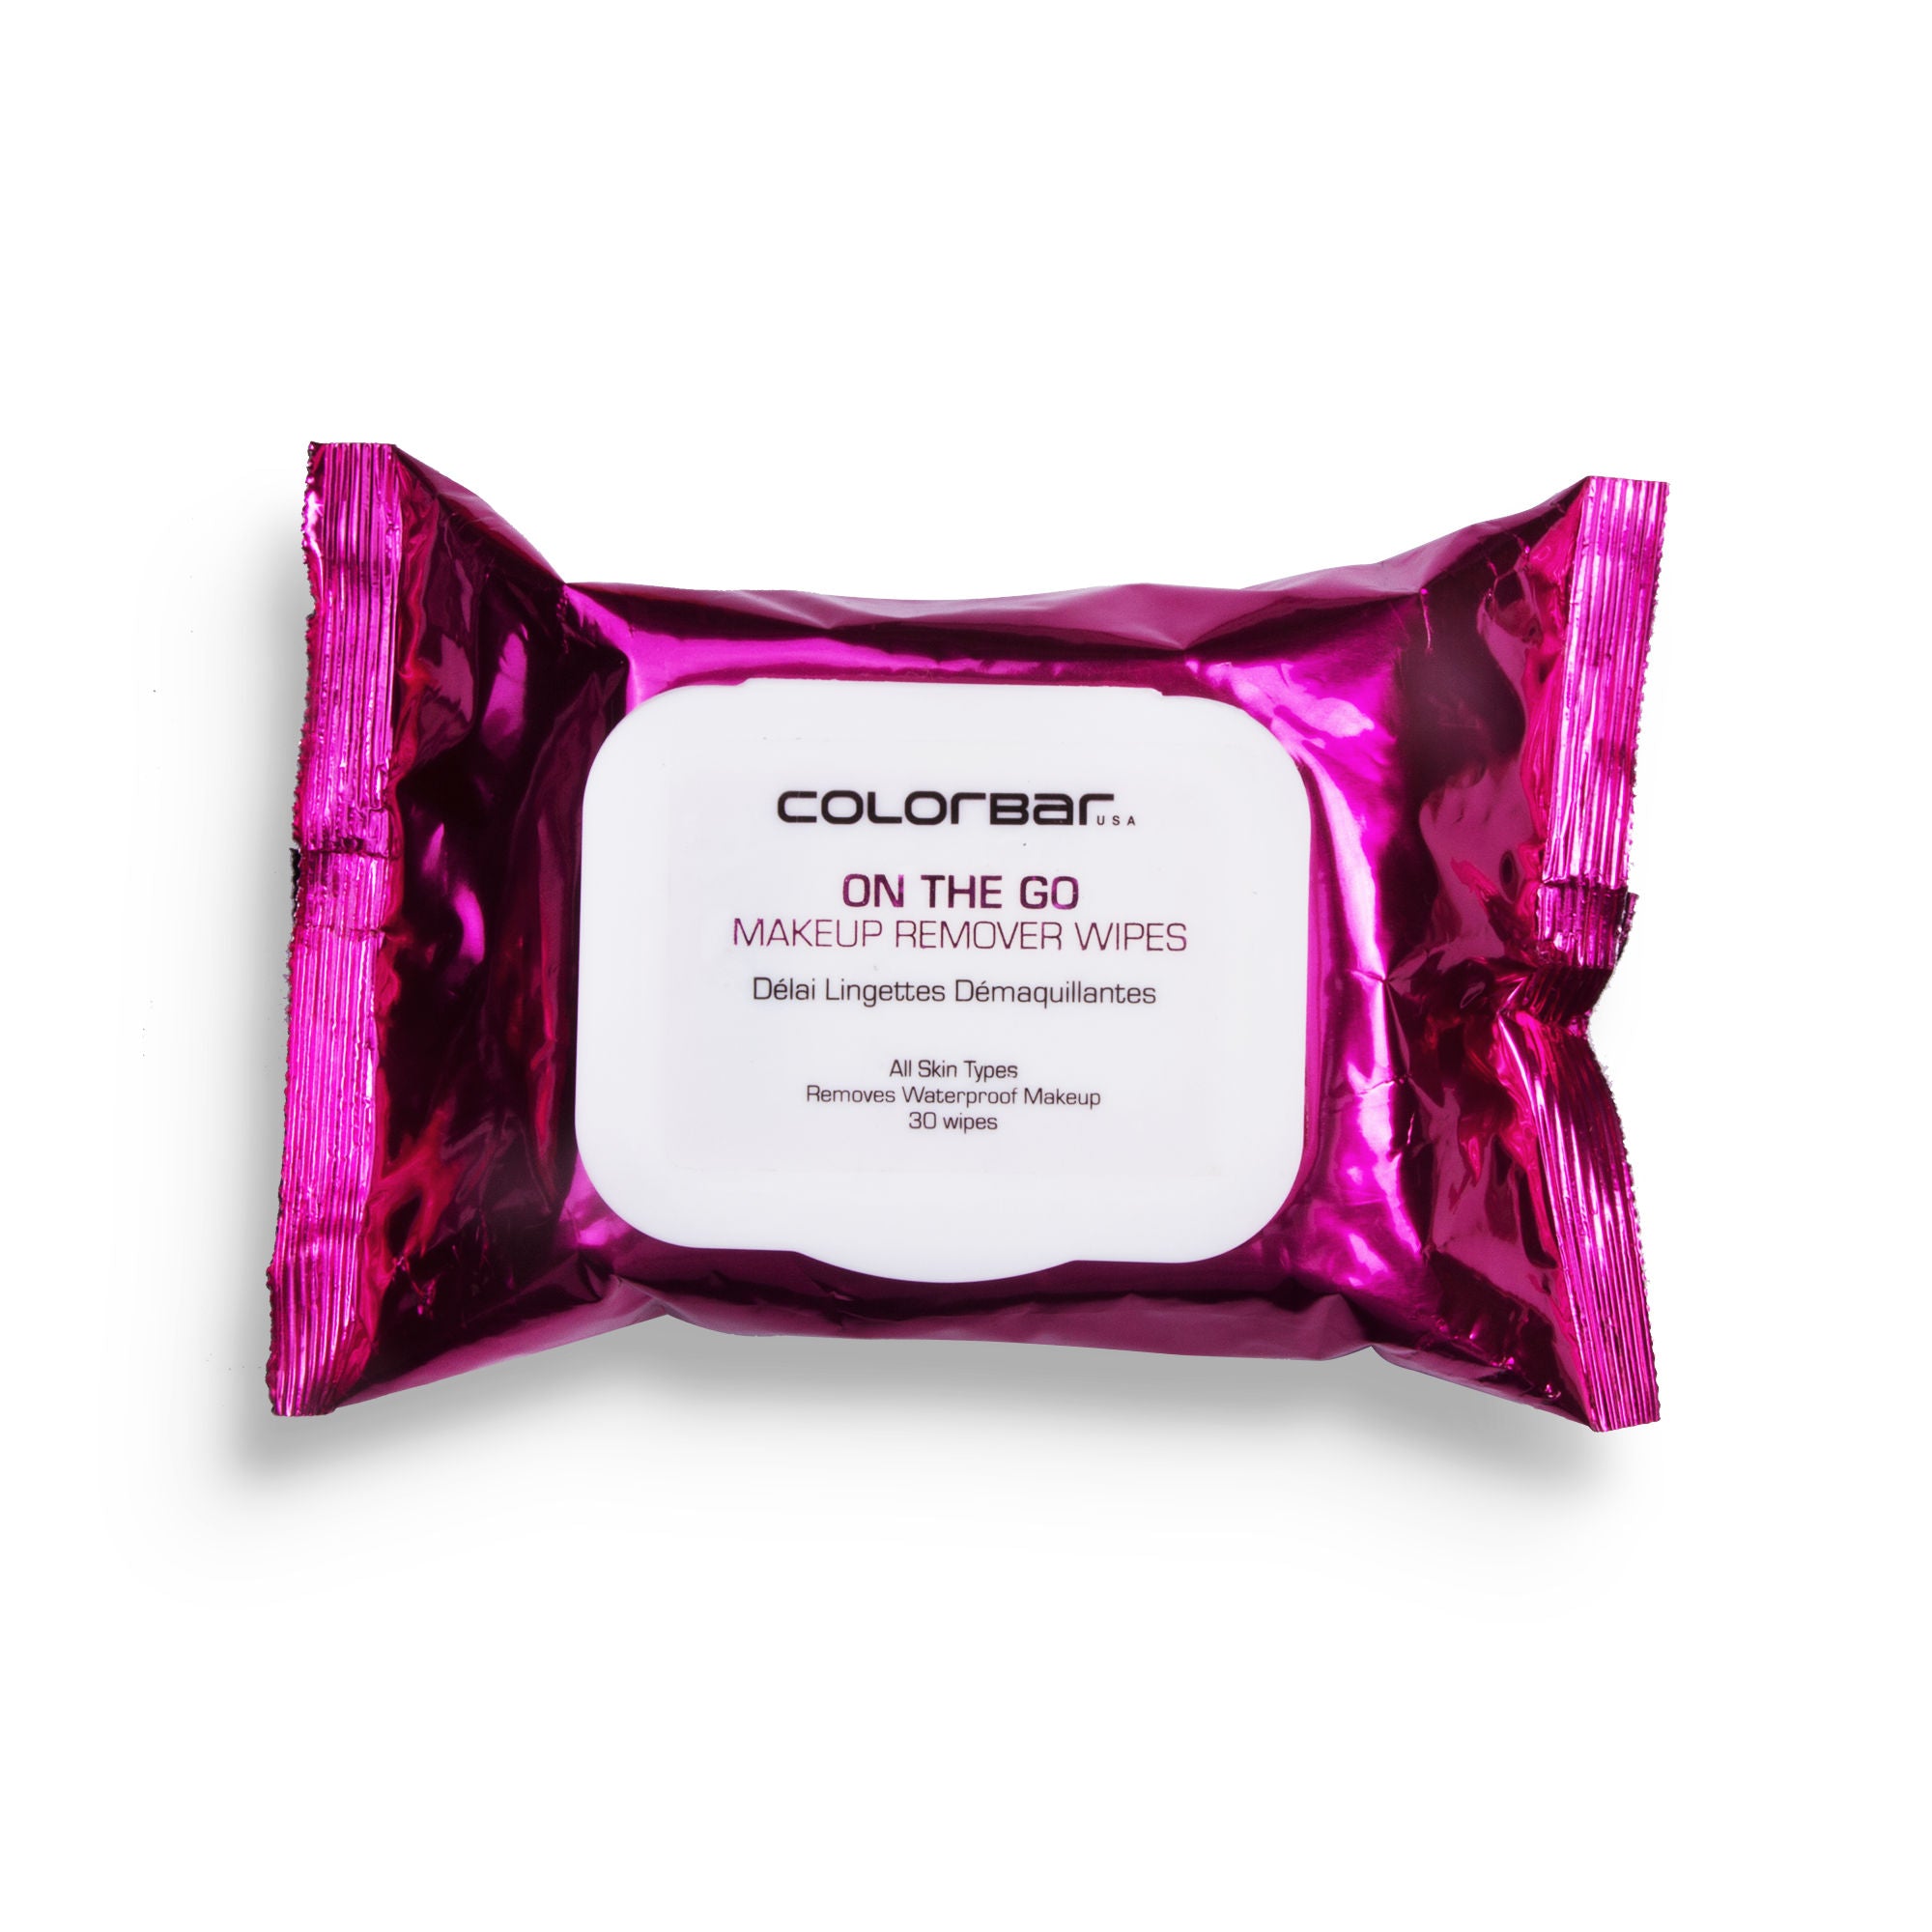 Colorbar On The Go Makeup Remover Wipes (30 Wipes) Colorbar